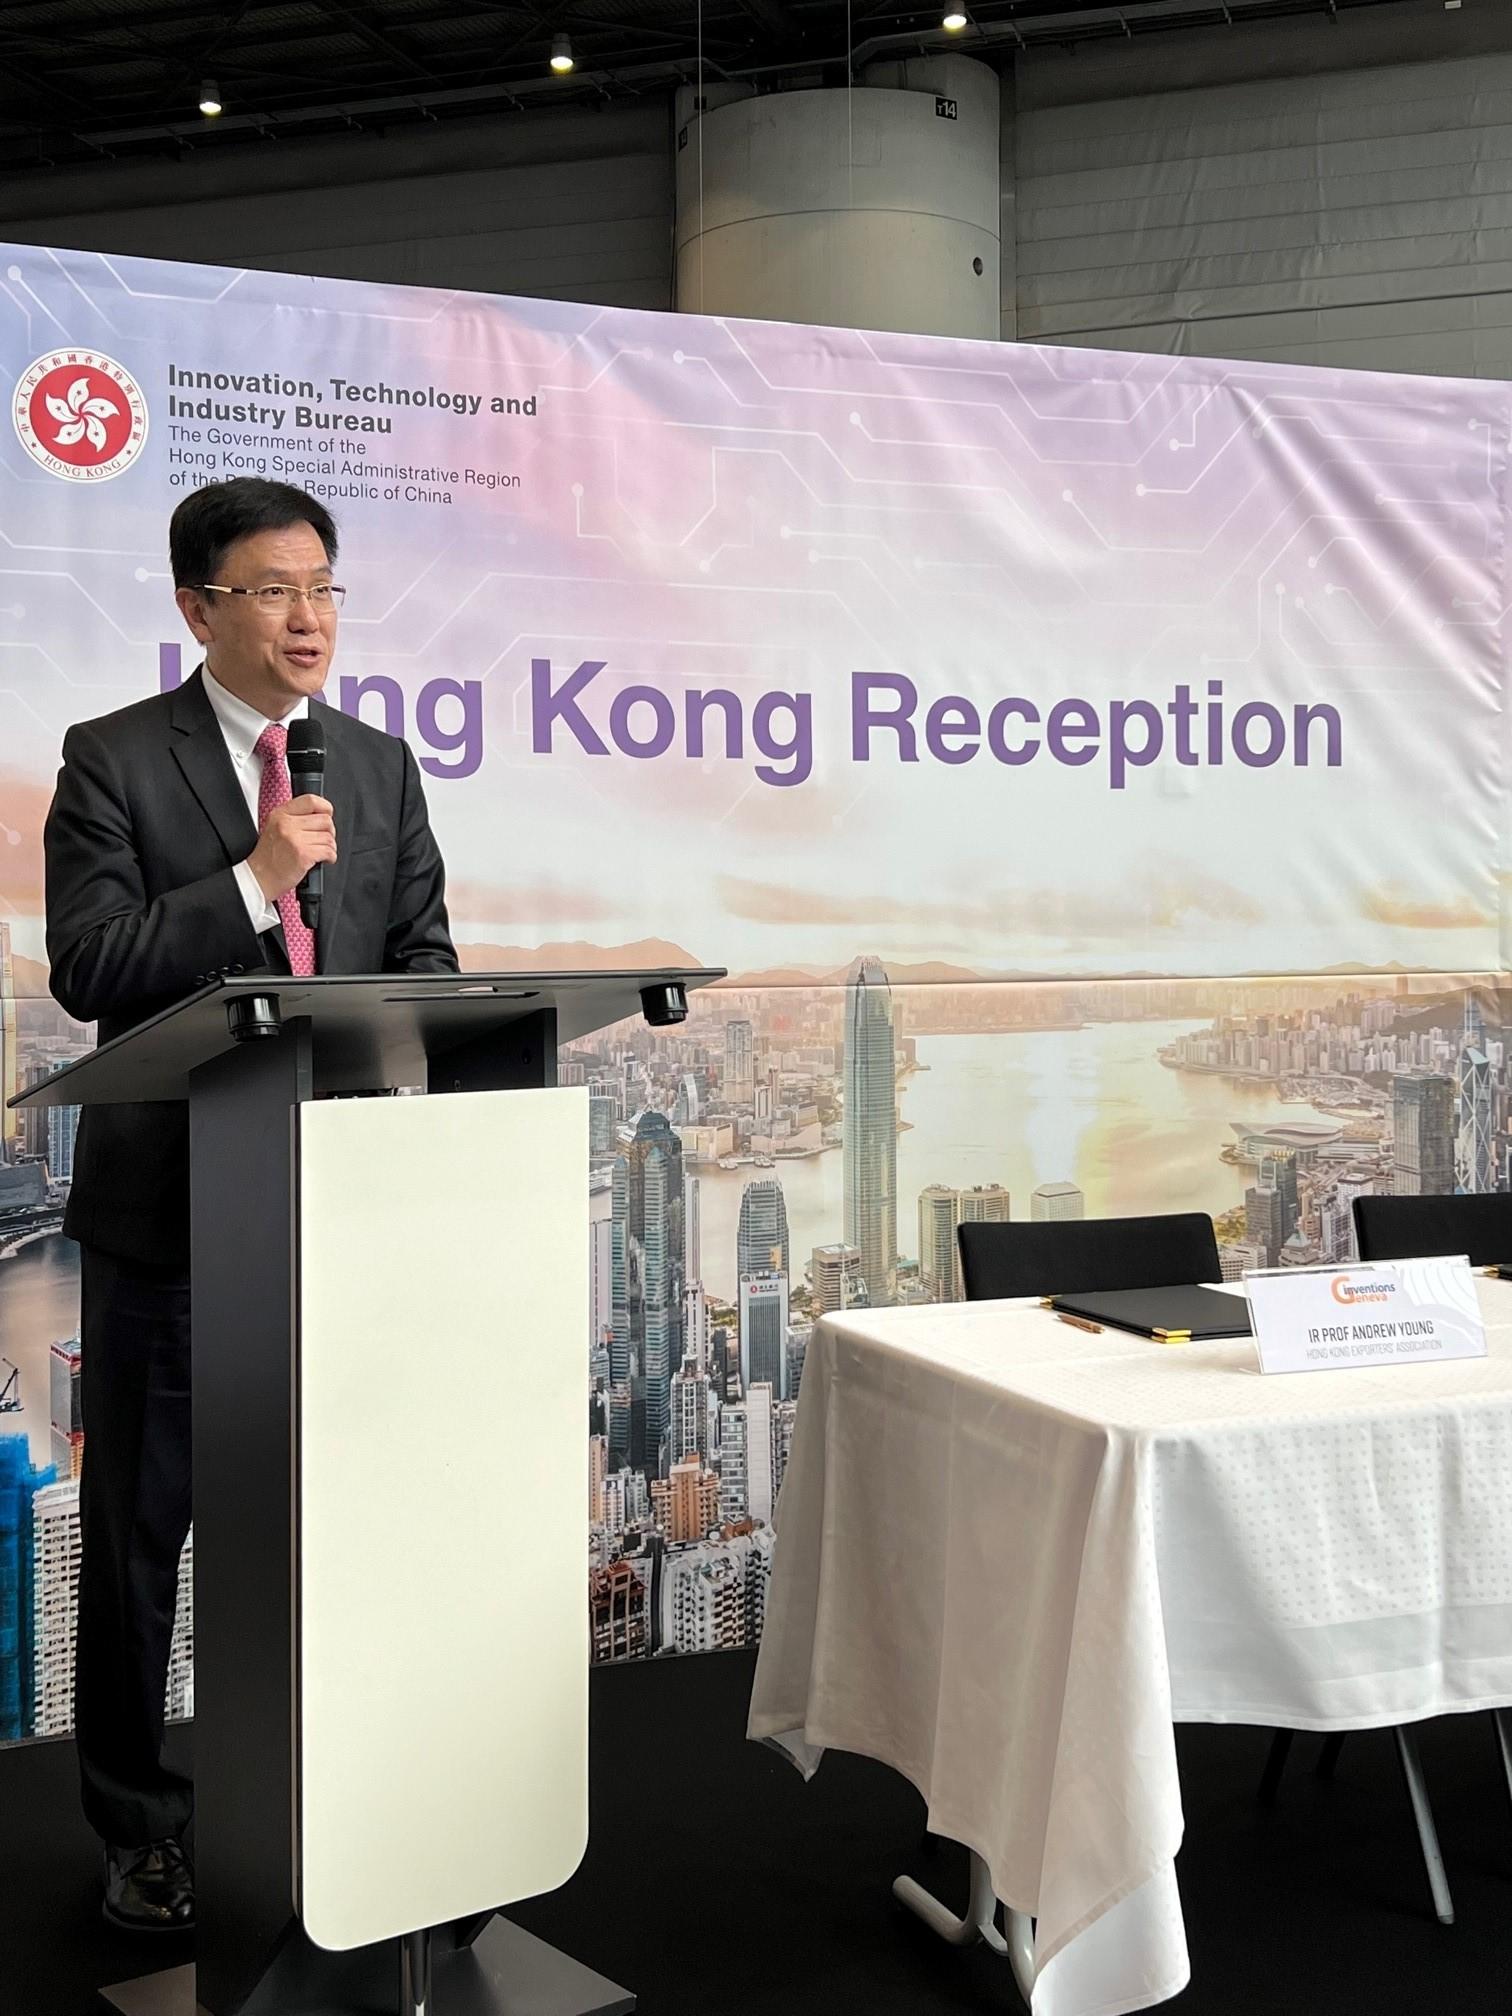 The Secretary for Innovation, Technology and Industry, Professor Sun Dong, attended the Geneva International Exhibition of Inventions 2023 and spoke at a Hong Kong reception hosted by the Government of the Hong Kong Special Administrative Region in Geneva, Switzerland, yesterday (April 28, Geneva time).